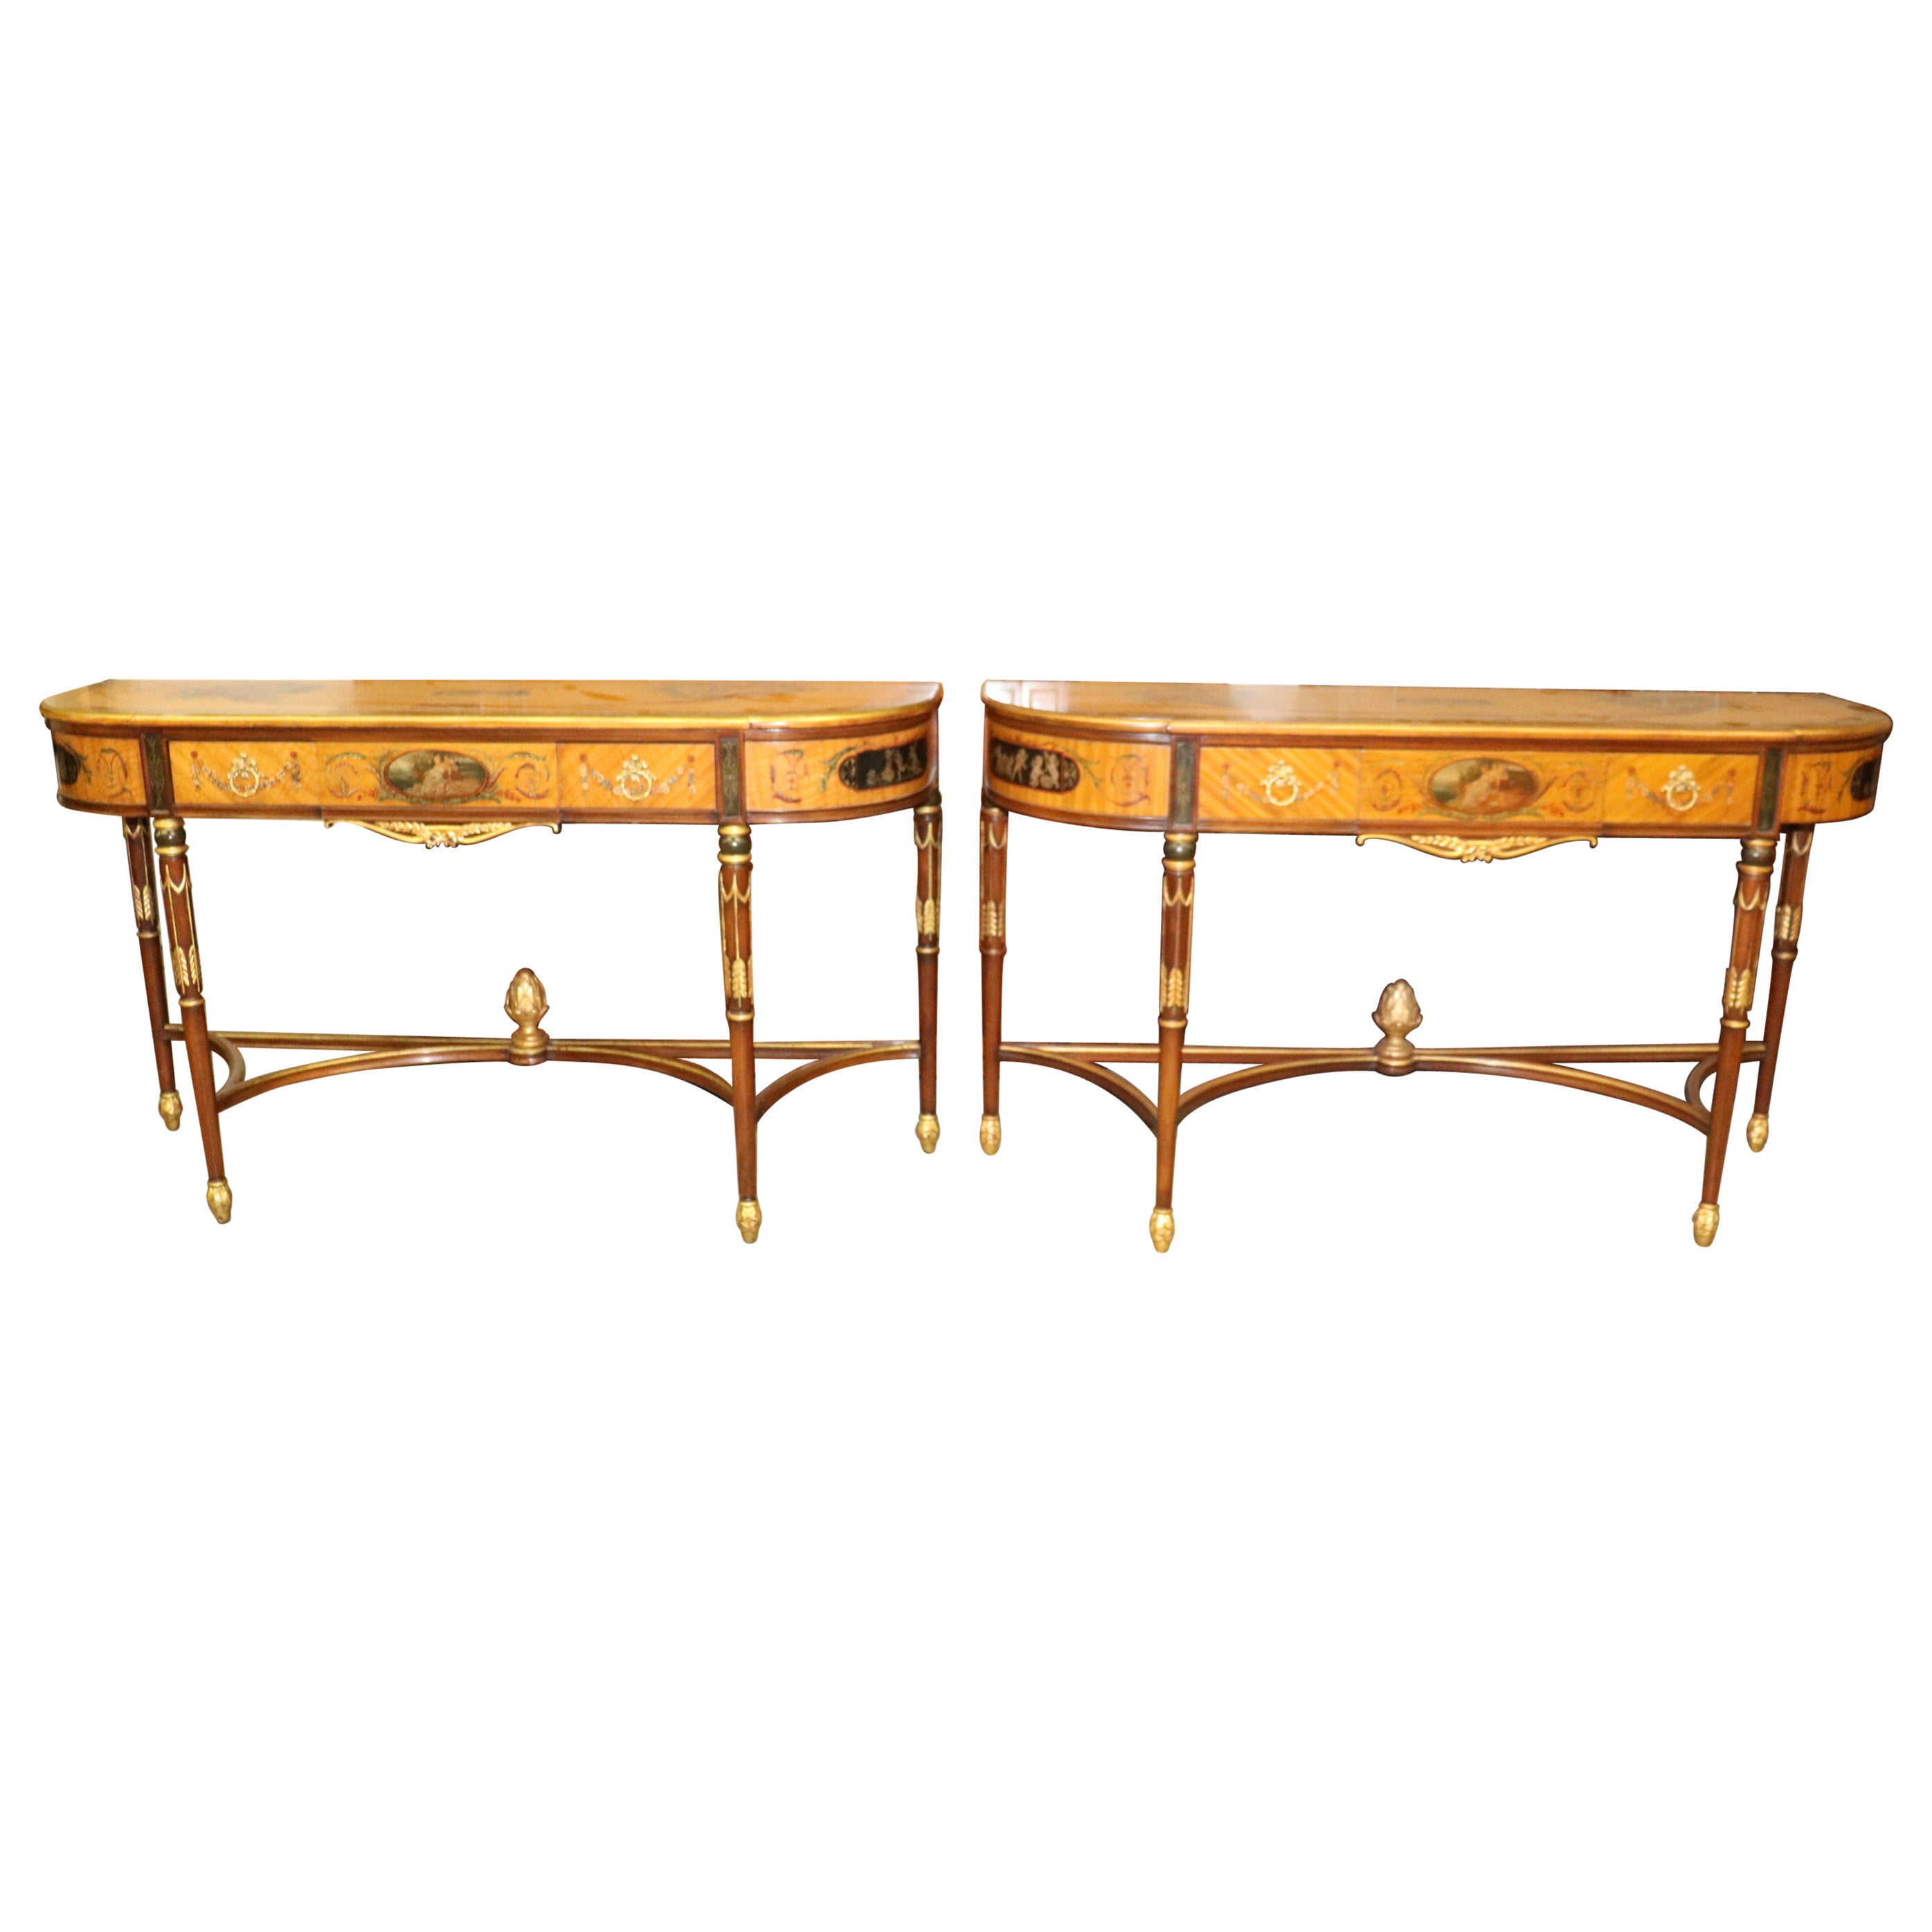 Fine Quality Paint Decorated Adams Satinwood Demilune Console Tables Circa 1900 For Sale